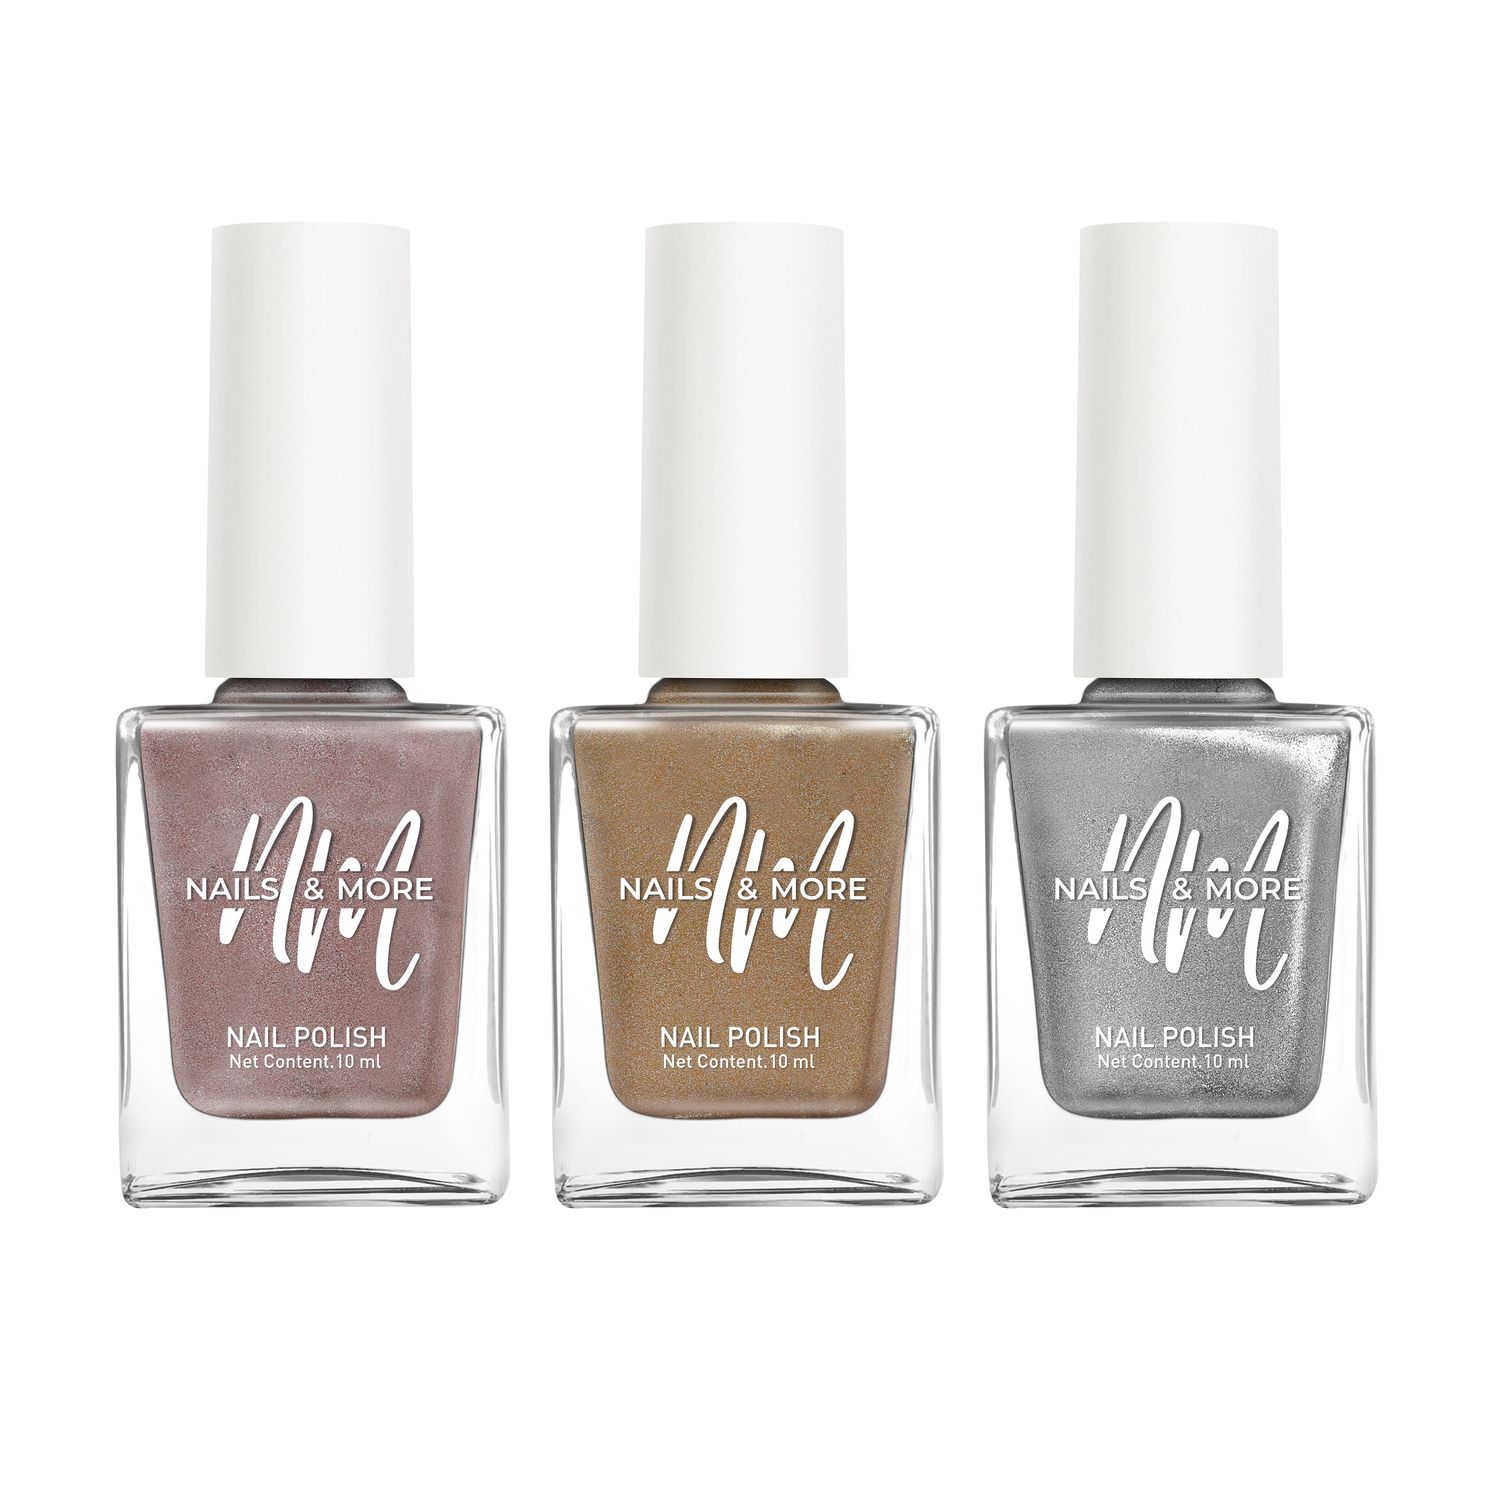 FREE Sample of Essie Metallic Copper Nail Polish - Deal Hunting Babe